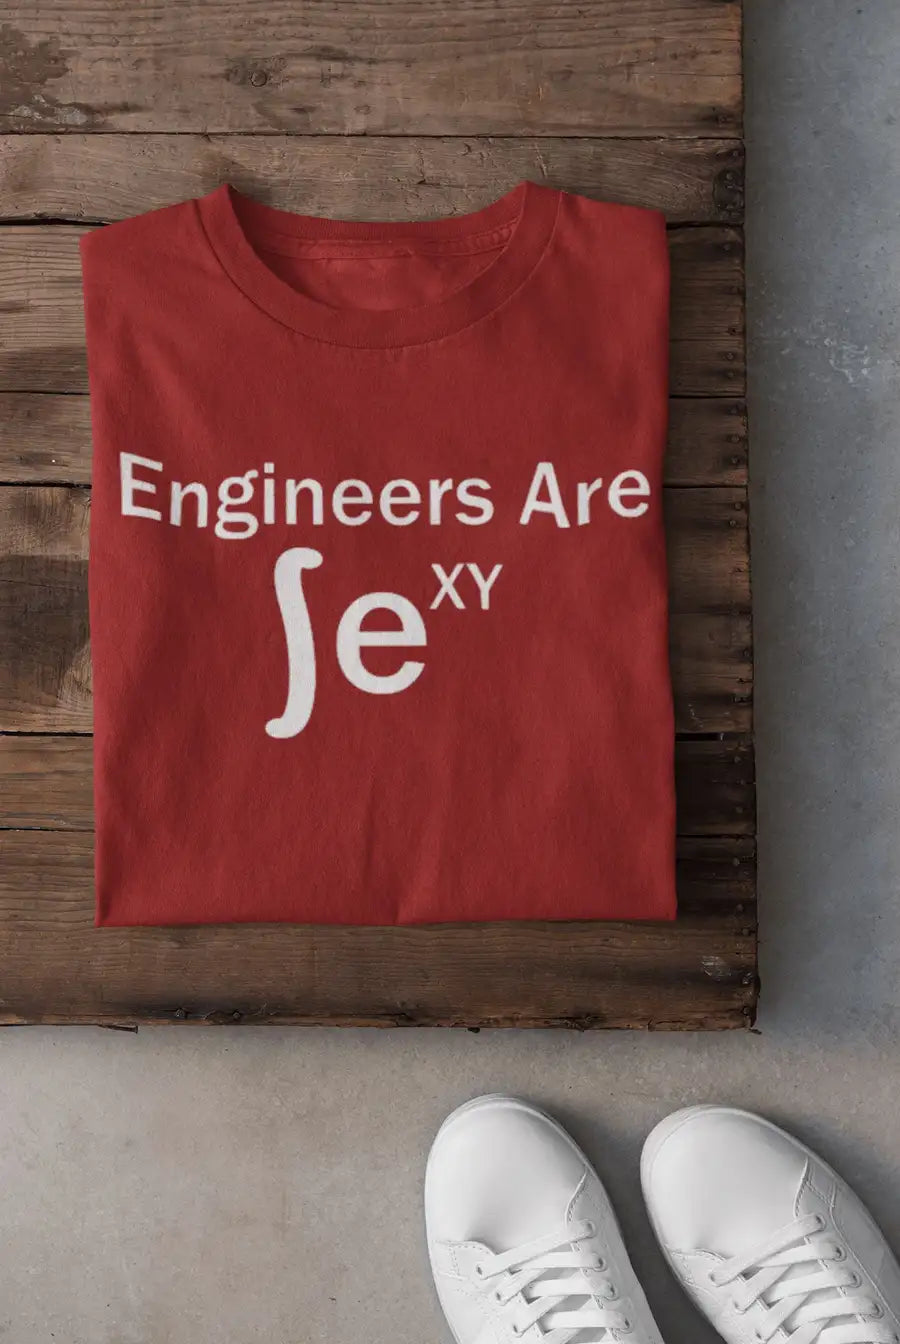 Engineers Are Sexy Exclusive T Shirt for Men | Premium Design | Catch My Drift India - Catch My Drift India Clothing black, clothing, engineer, engineering, made in india, red, shirt, t shirt